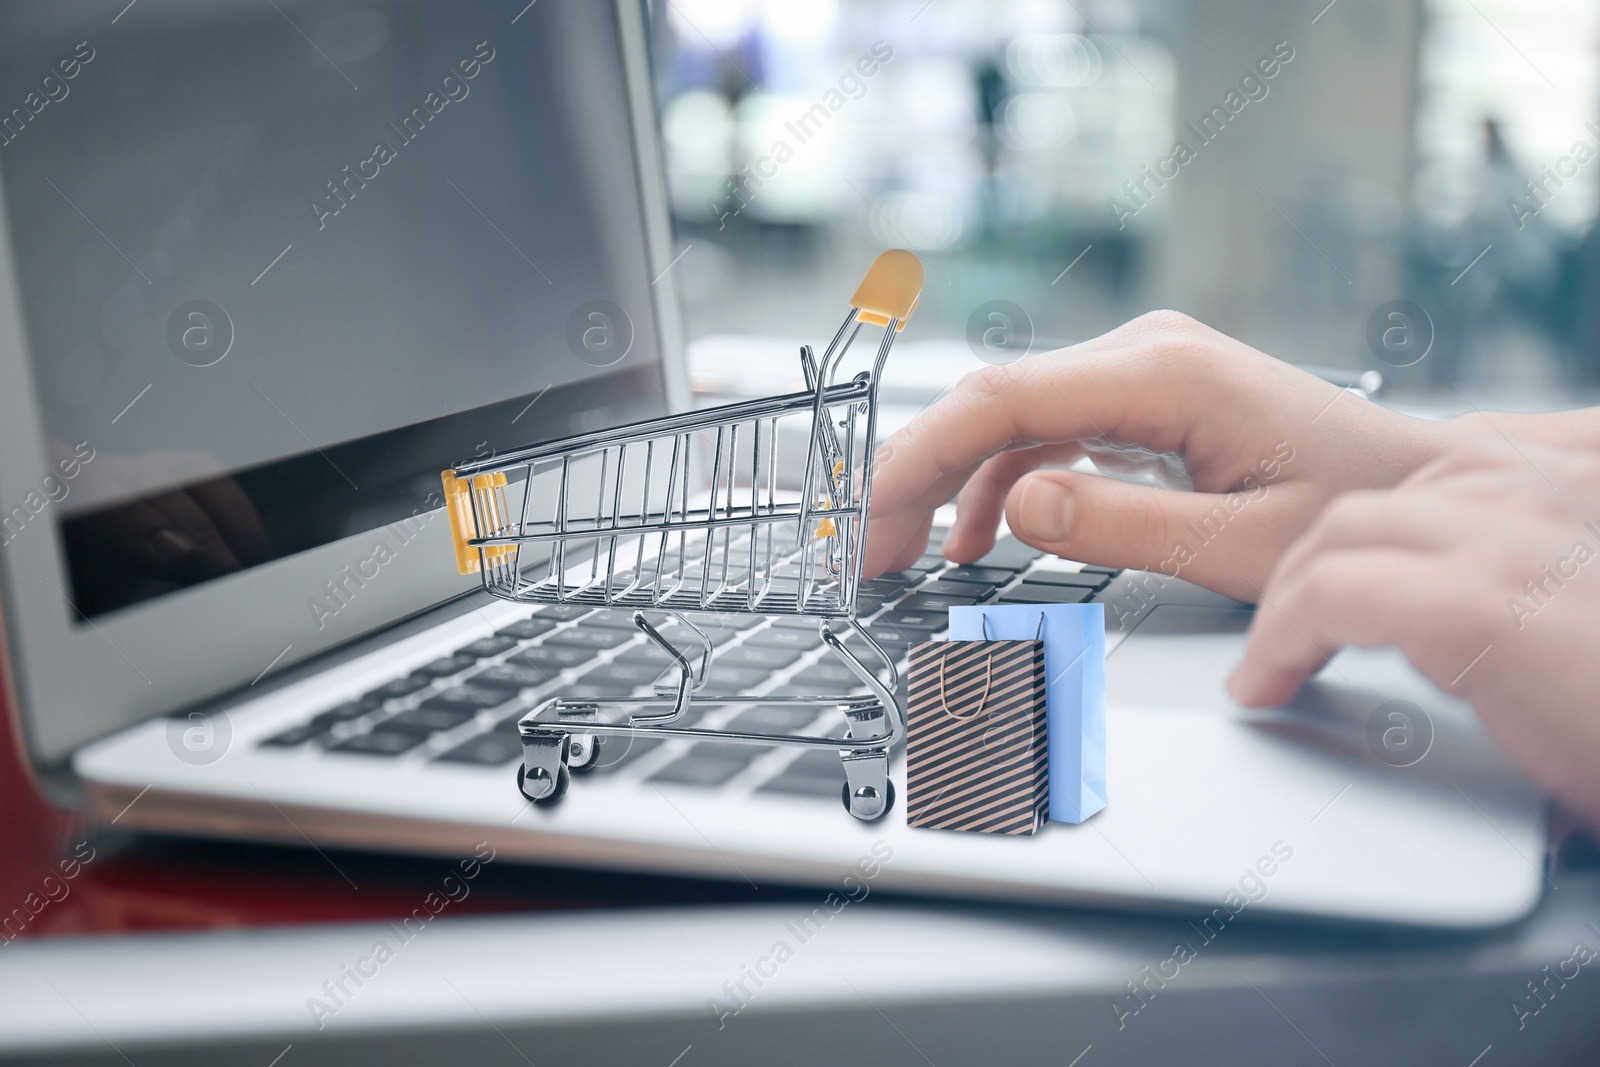 Image of Woman shopping online using laptop, focus on small cart and bags